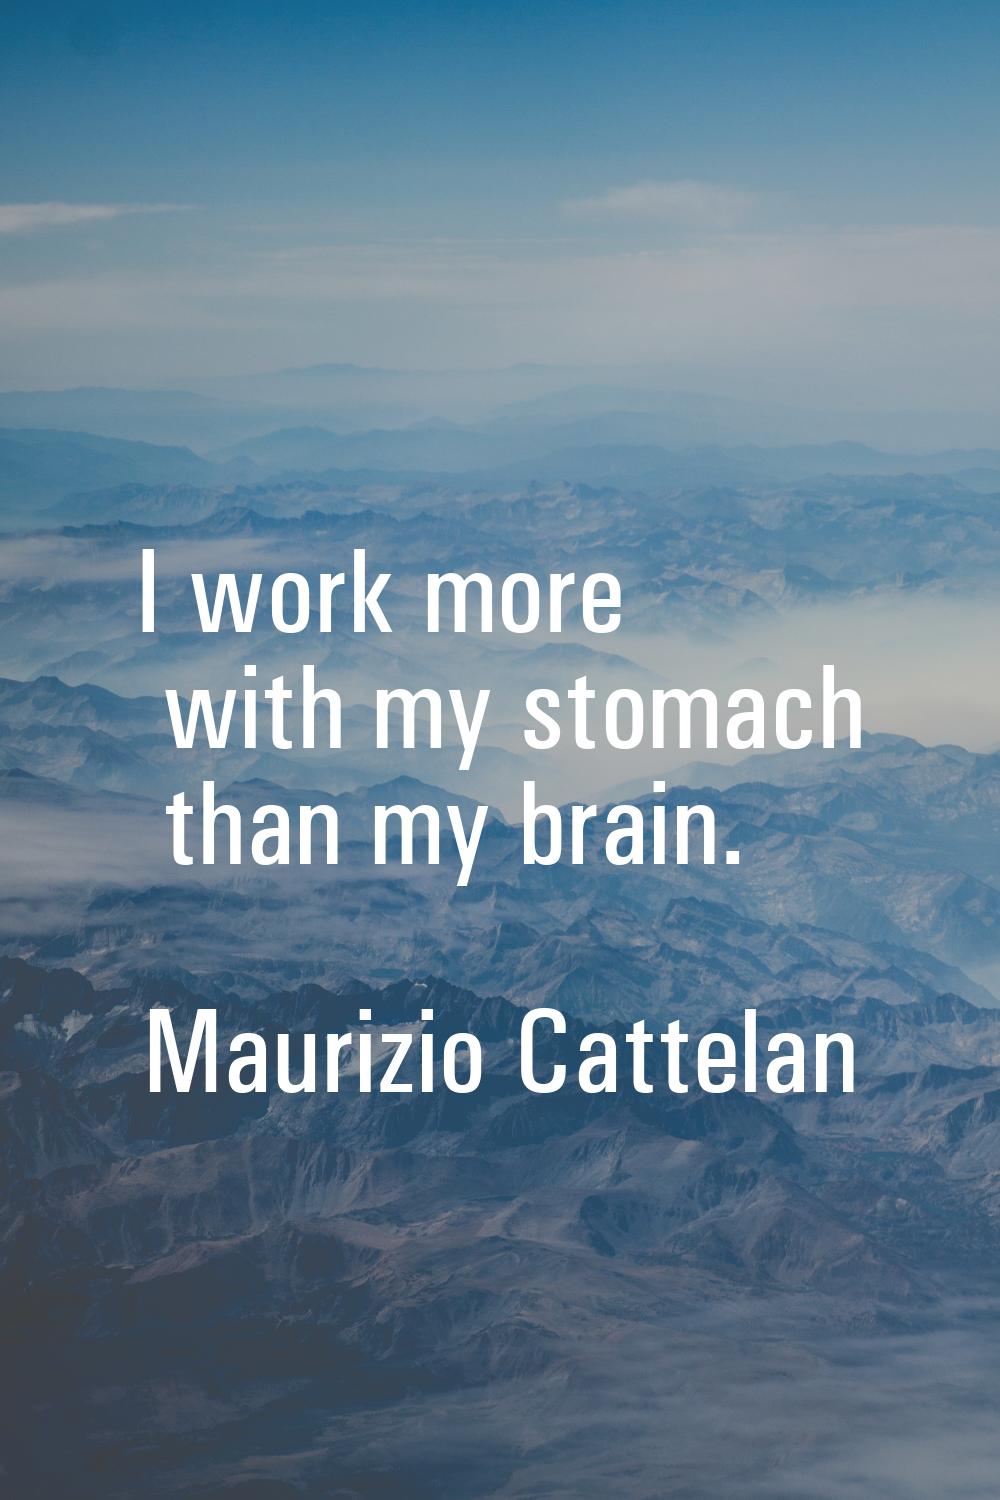 I work more with my stomach than my brain.